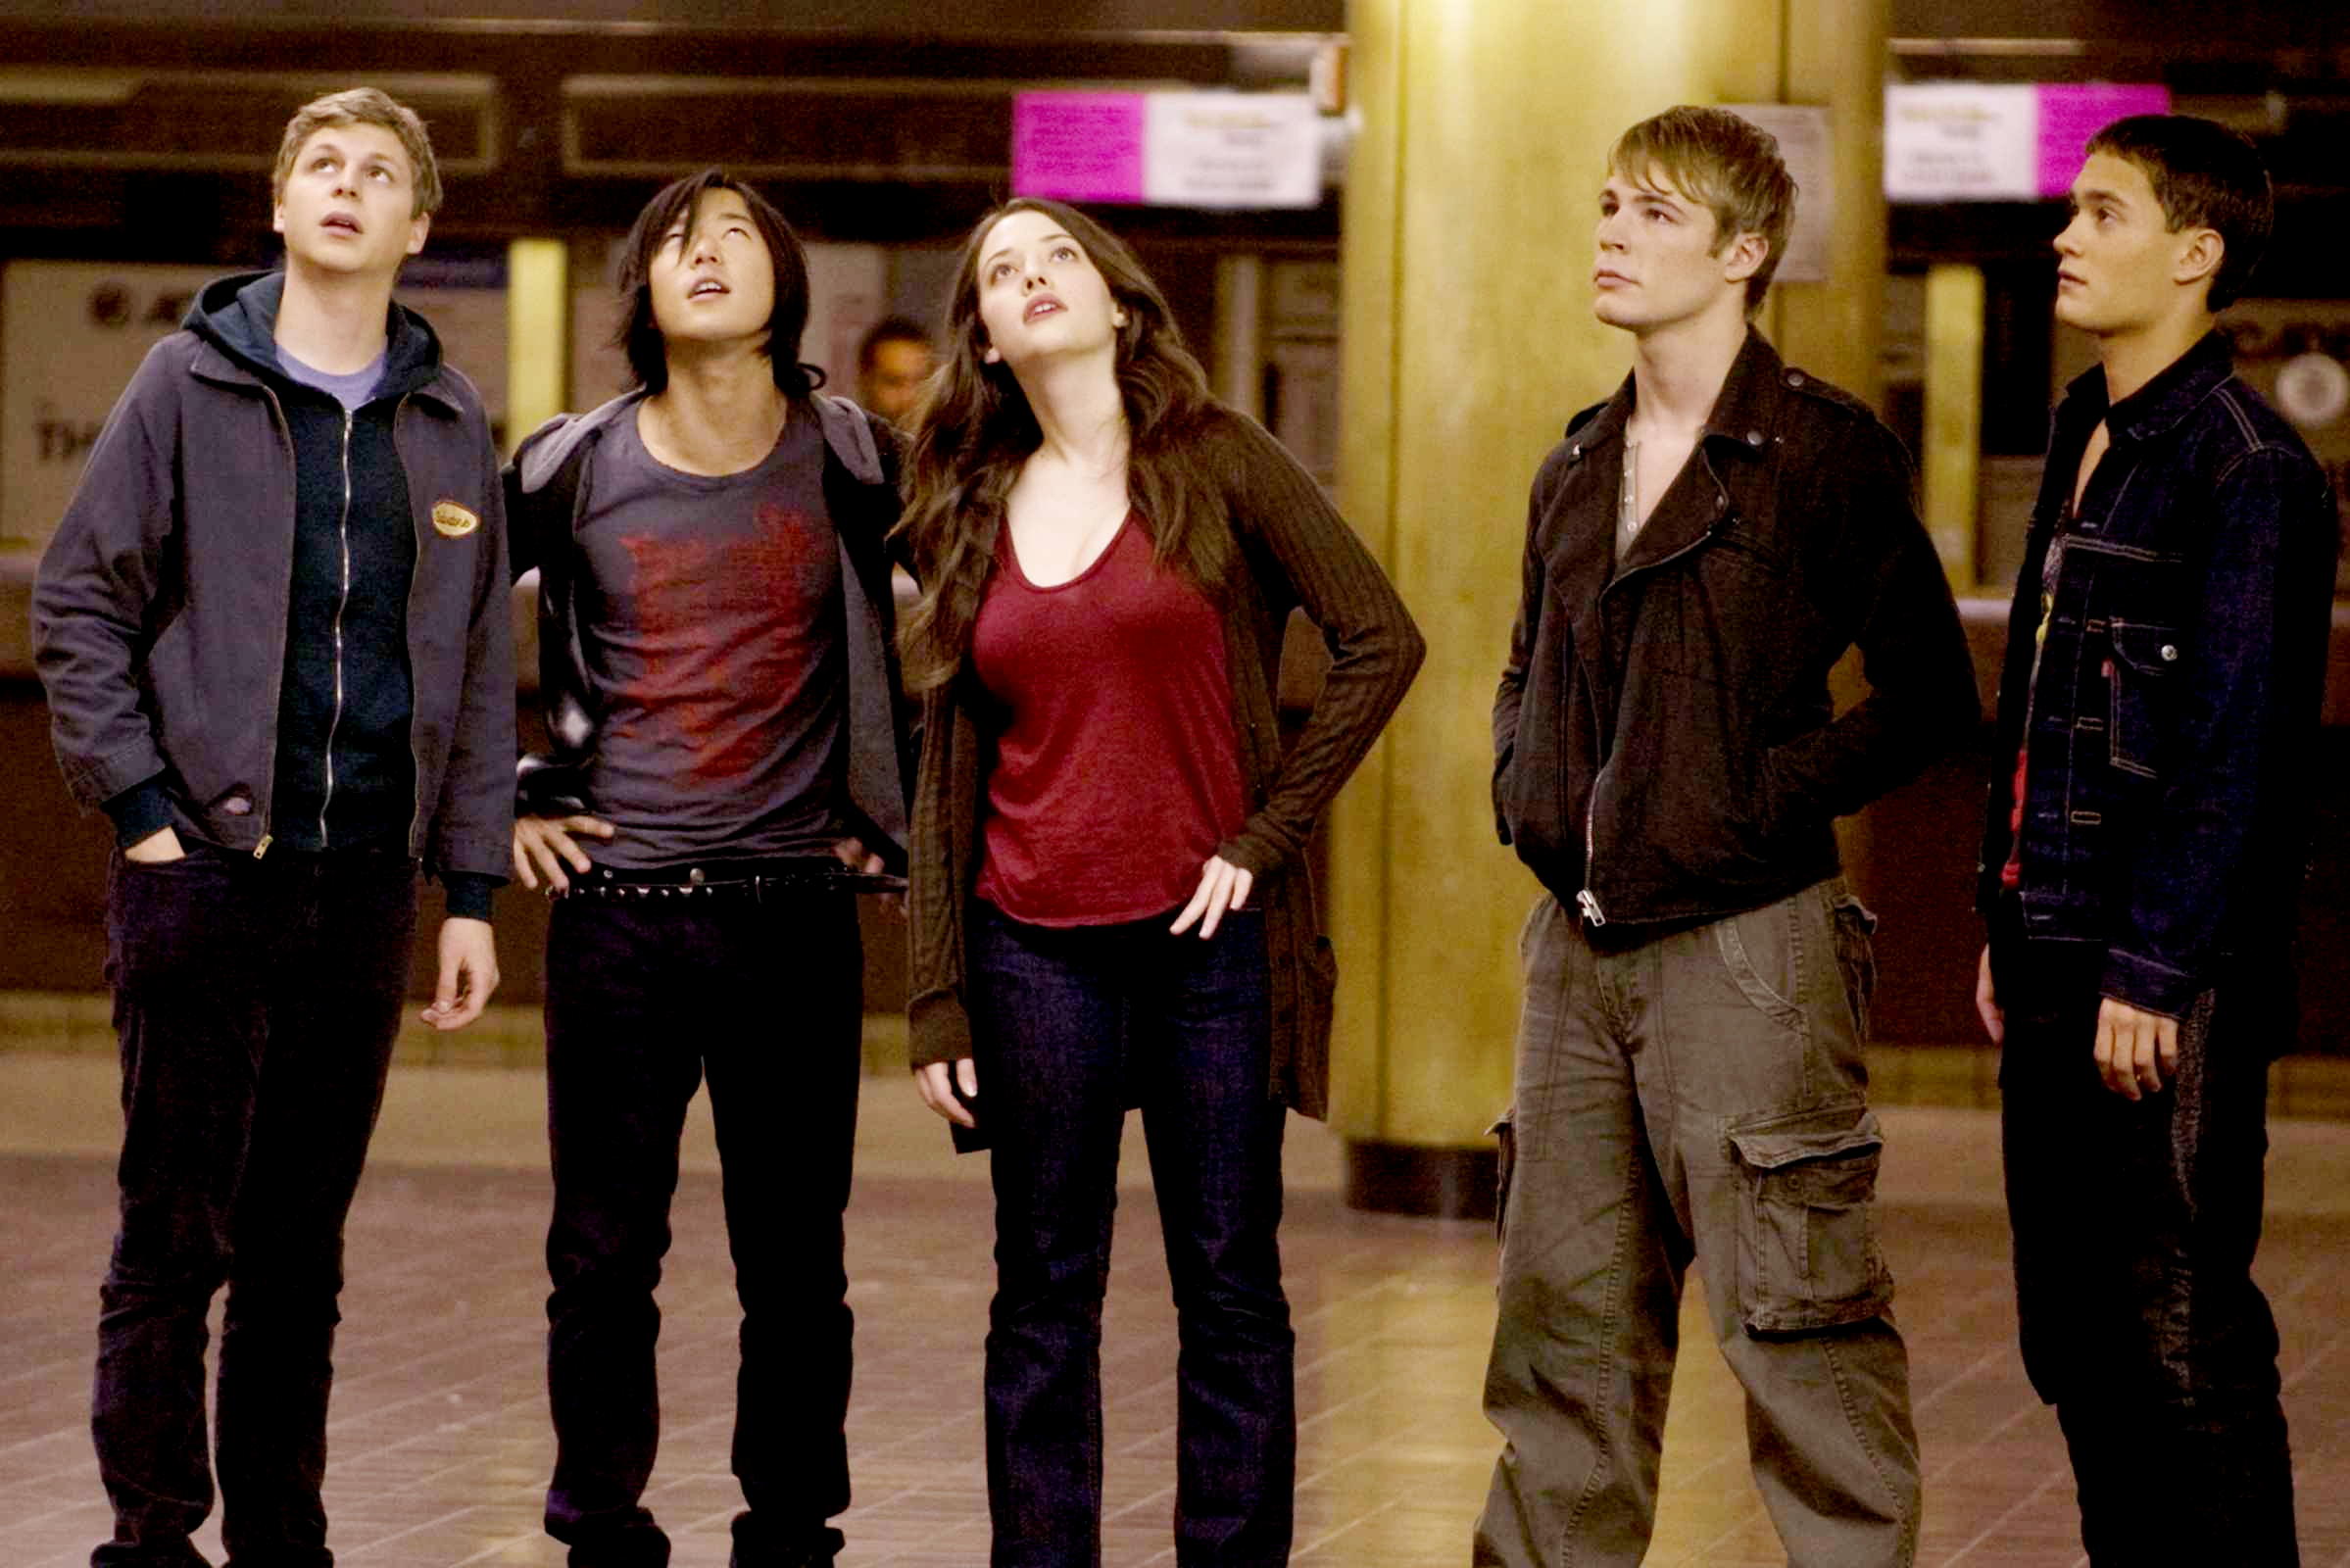 Michael Cera, Aaron Yoo, Kat Dennings, Jonathan B. Wright and Rafi Gavron in Sony Pictures' Nick and Norah's Infinite Playlist (2008). Photo credit by K.C. Bailey.